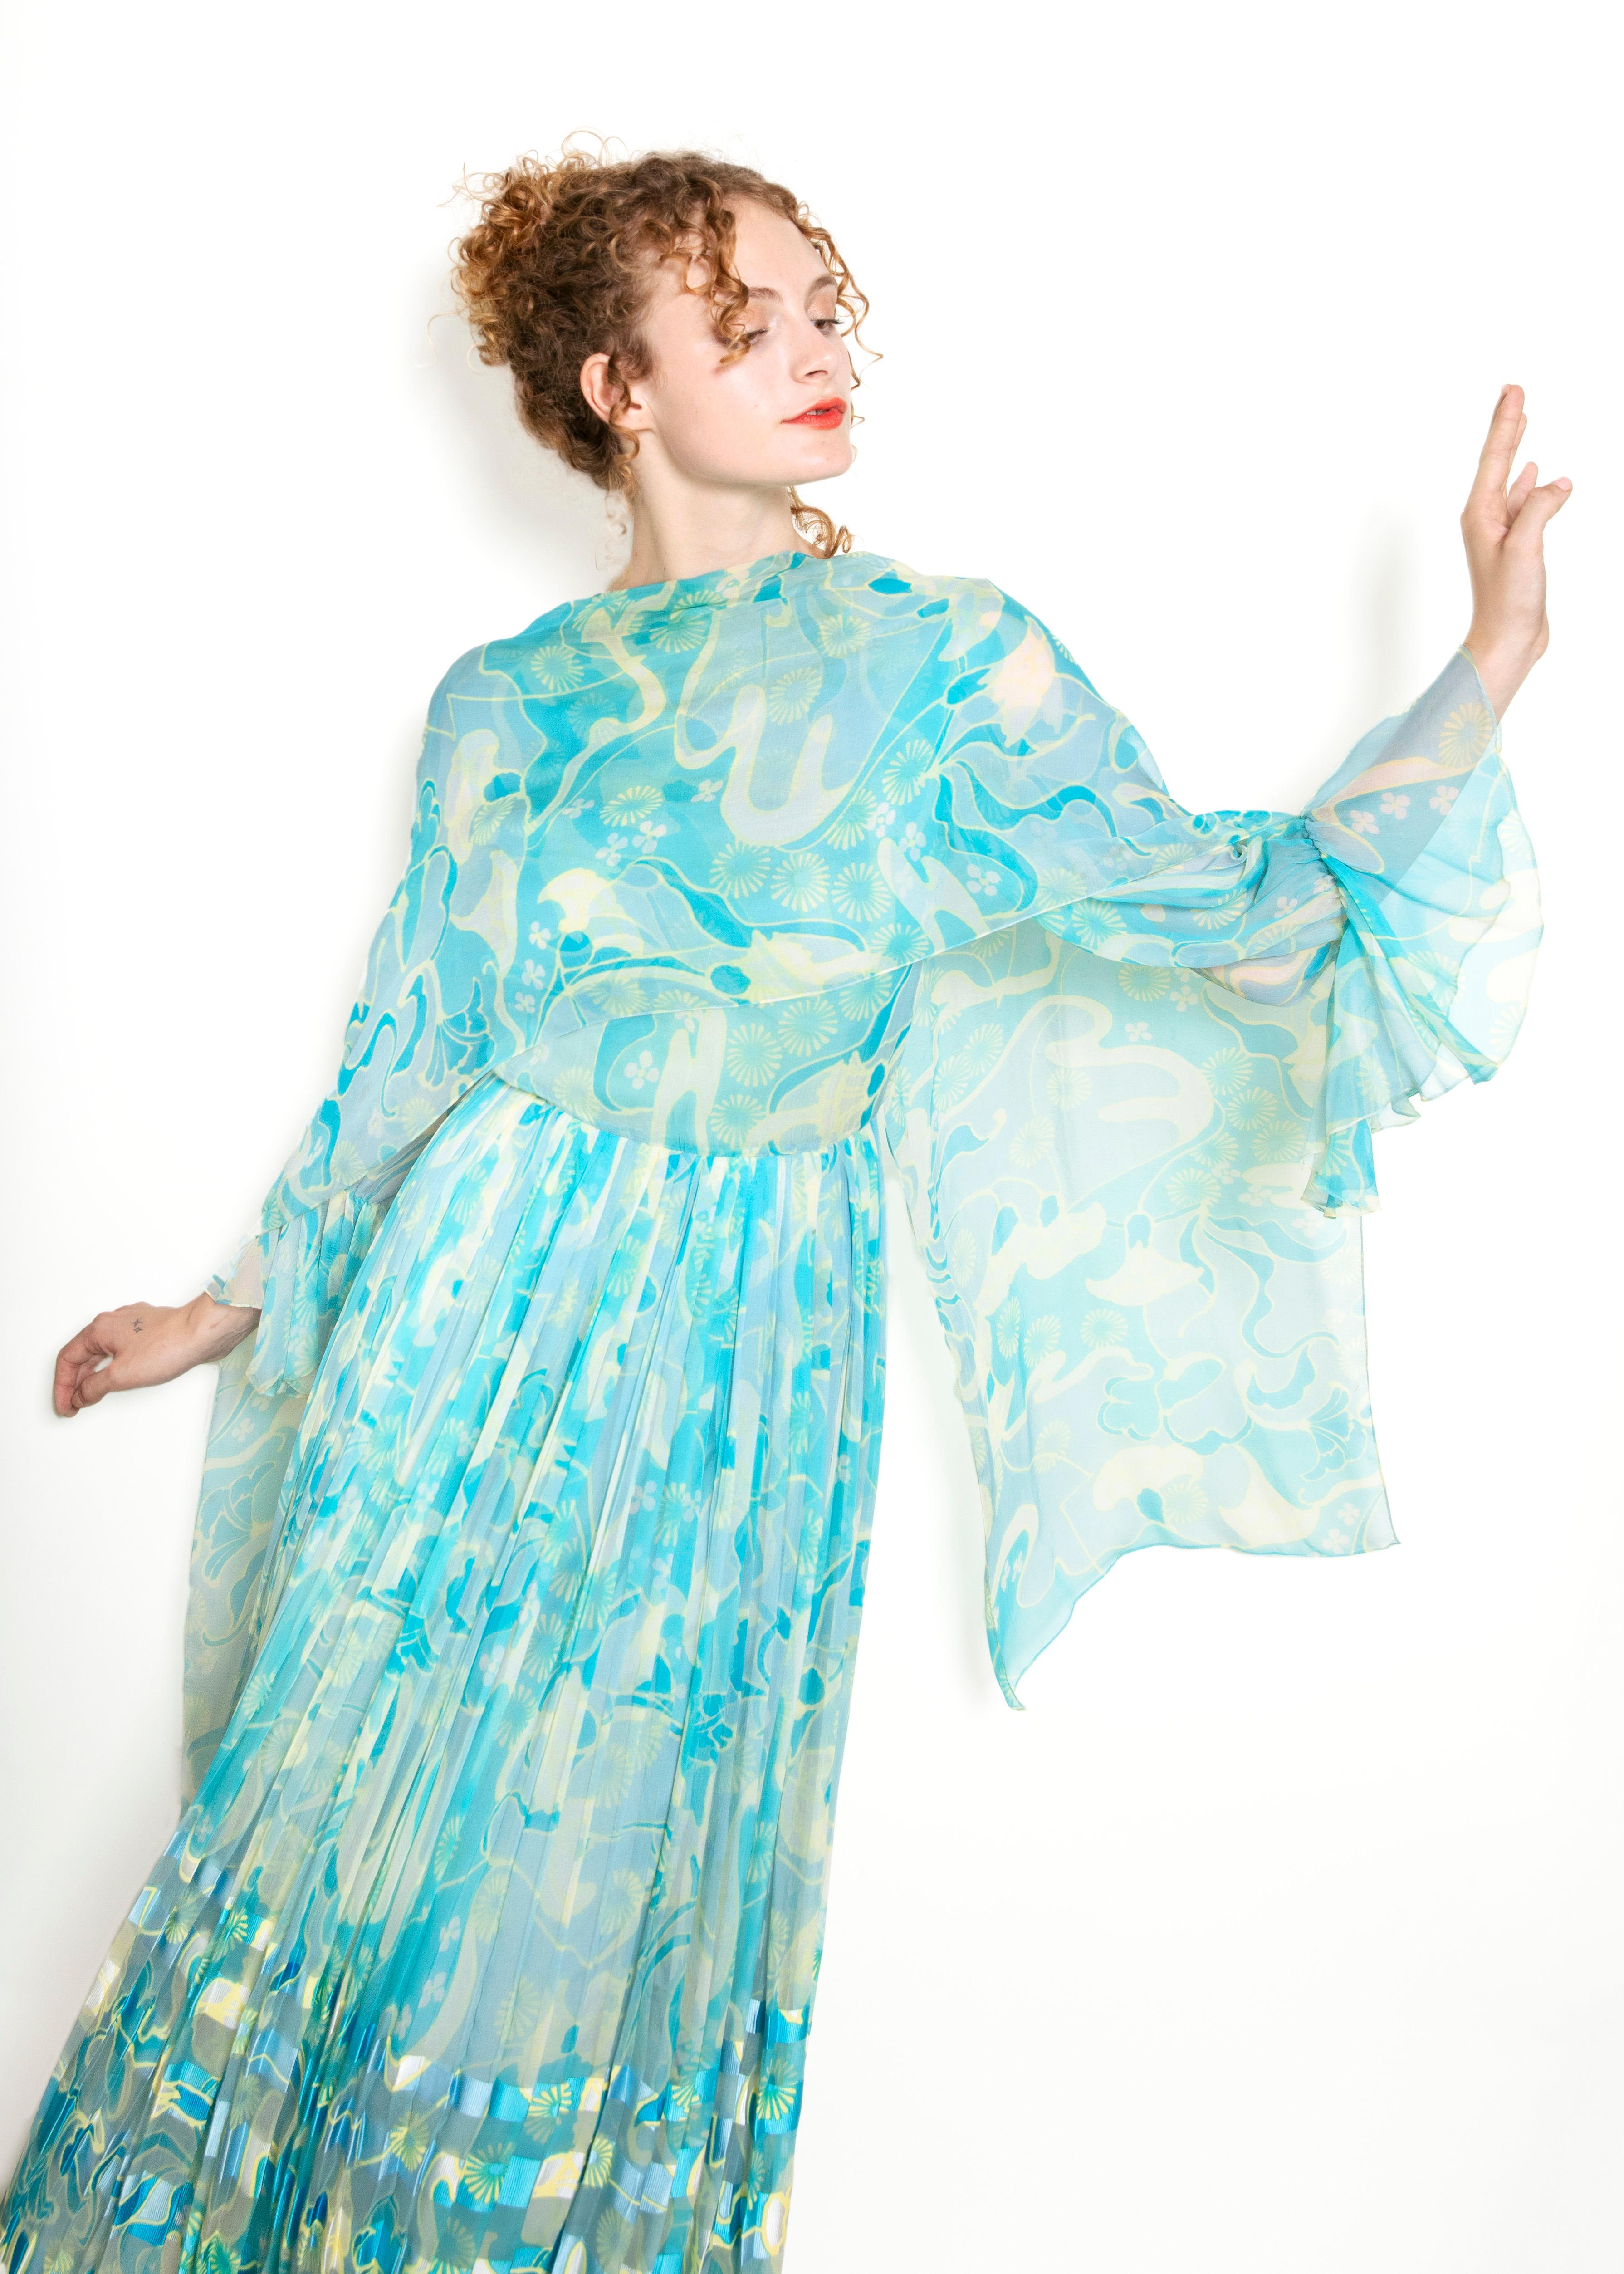 The perfect dress to make a statement – this Vintage 1970's Blue Silk Printed Chiffon Dress is a fashionista's dream come true. Boasting a classic 70's look with its pleated draping and multi-colored silk print, you'll be feeling like a total retro